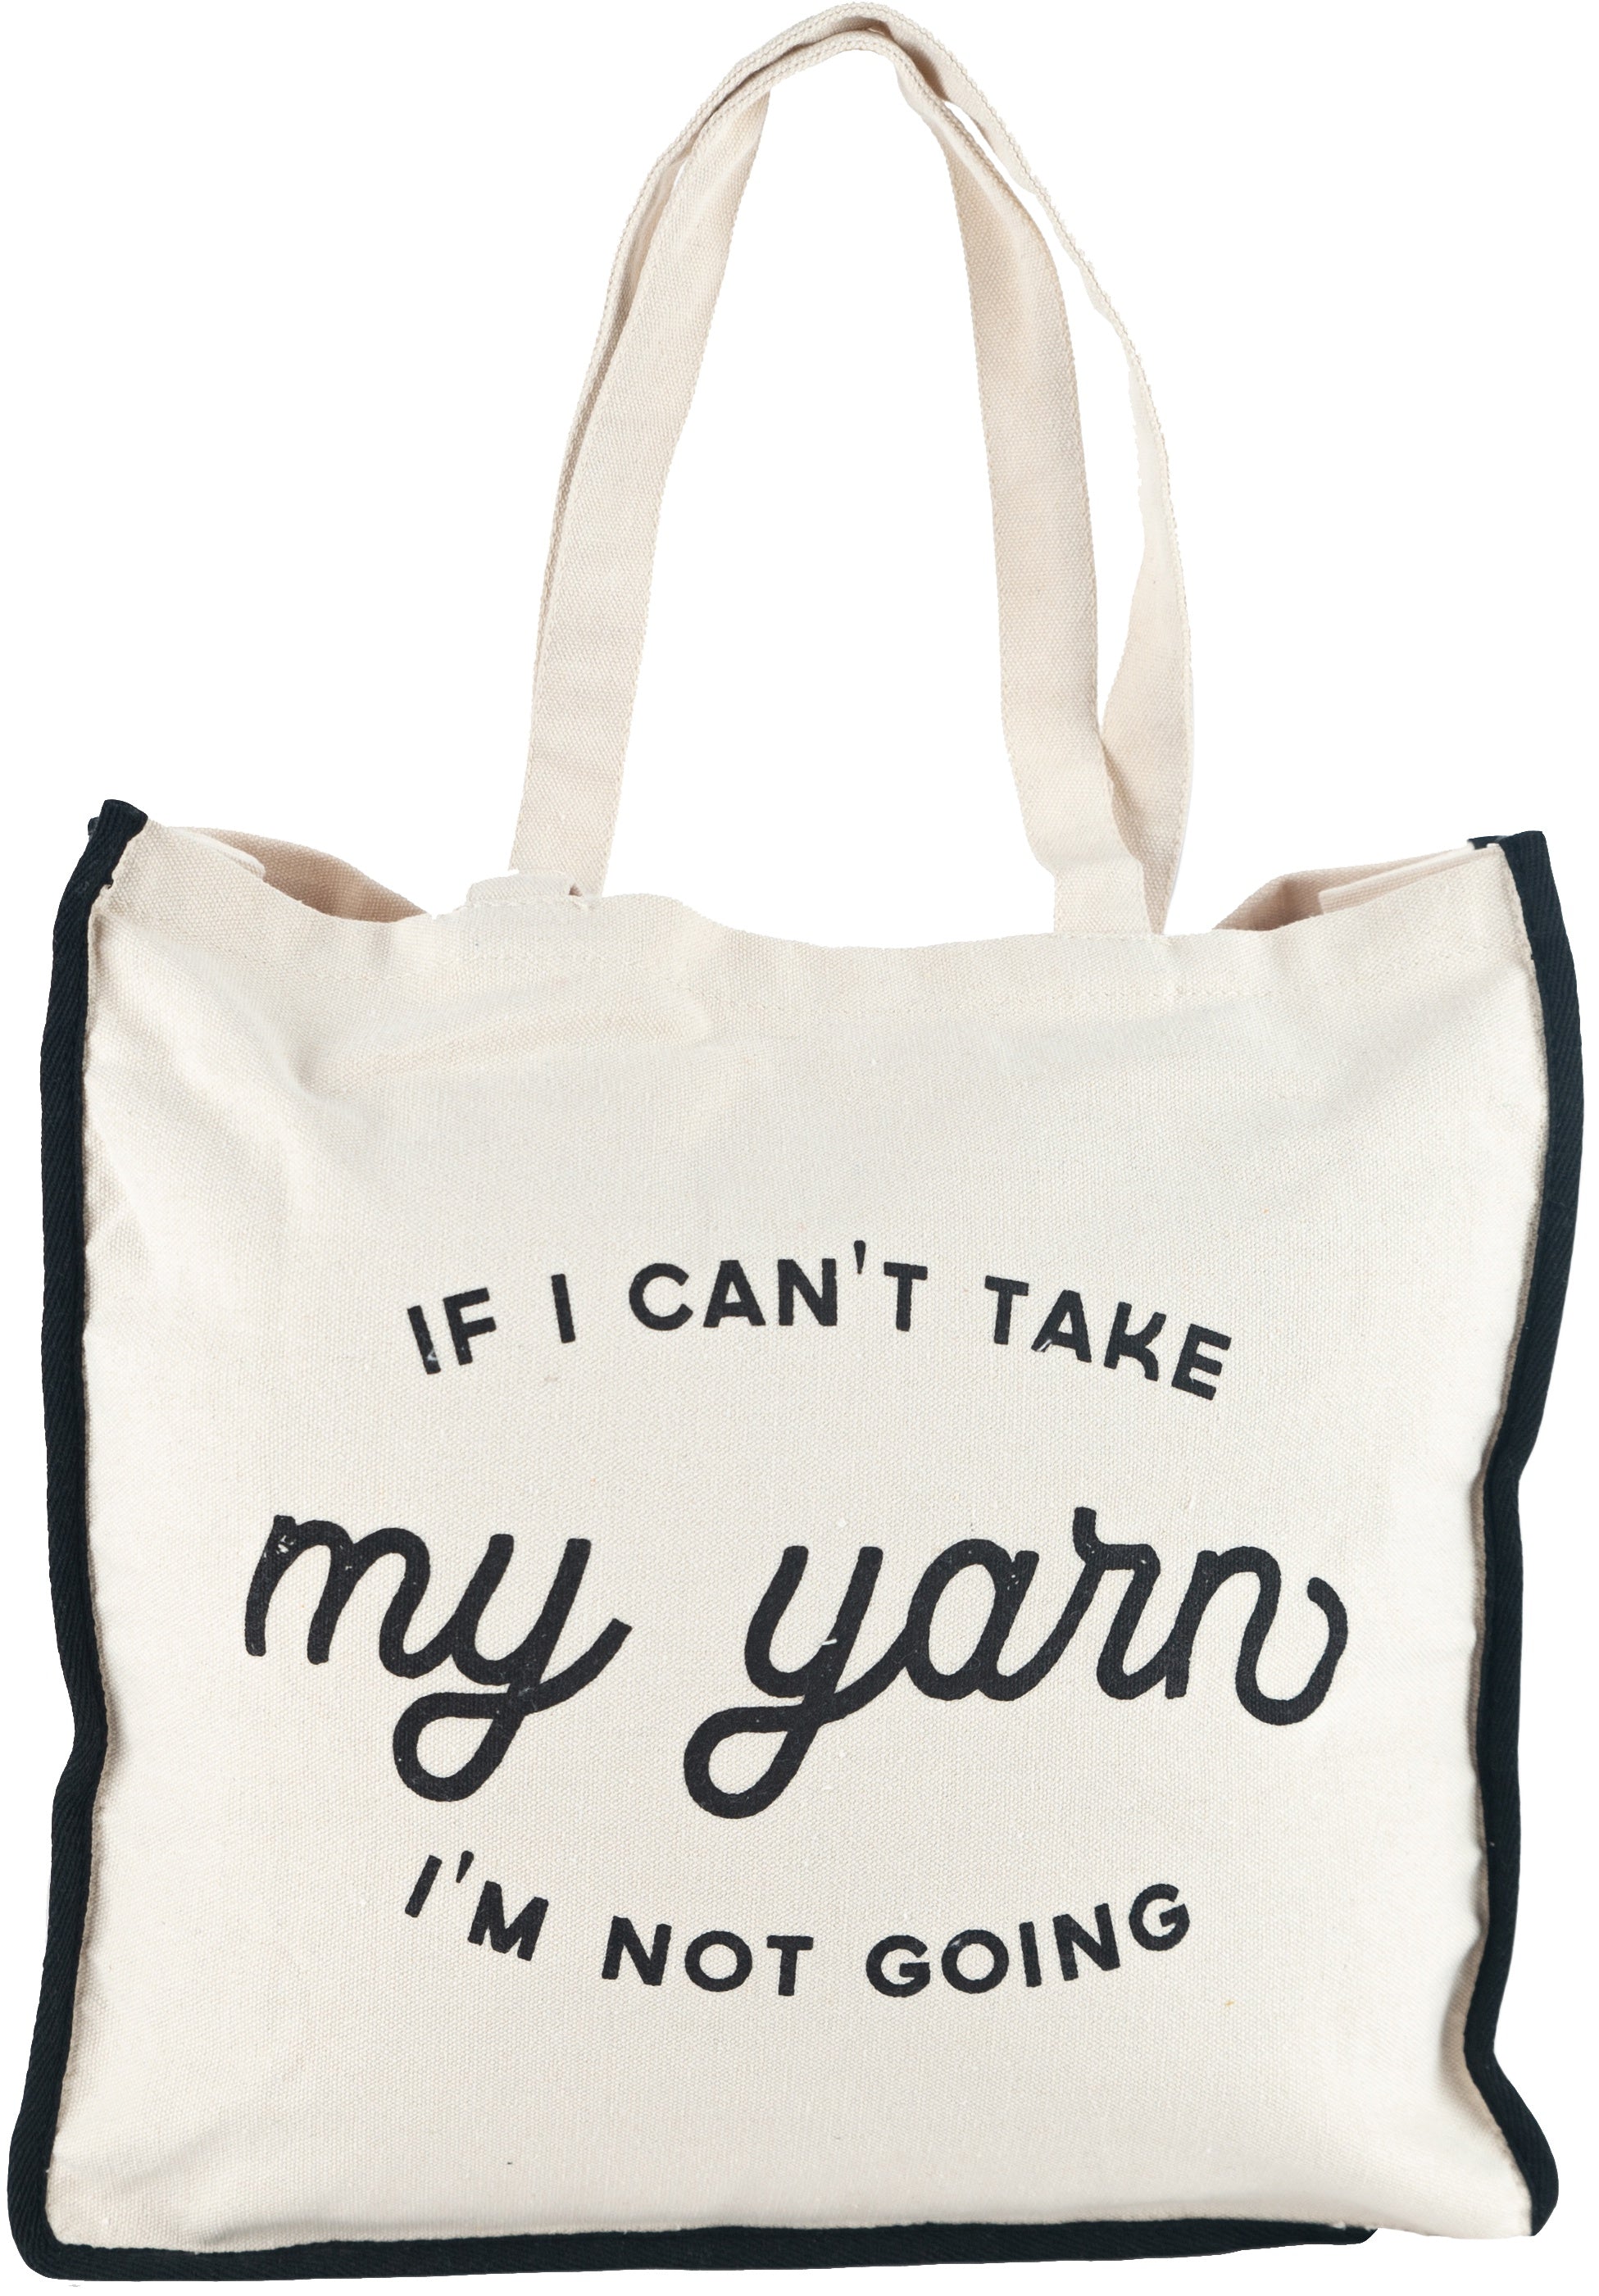 BUY MORE YARN Cotton Tote Bag with Snap Closure